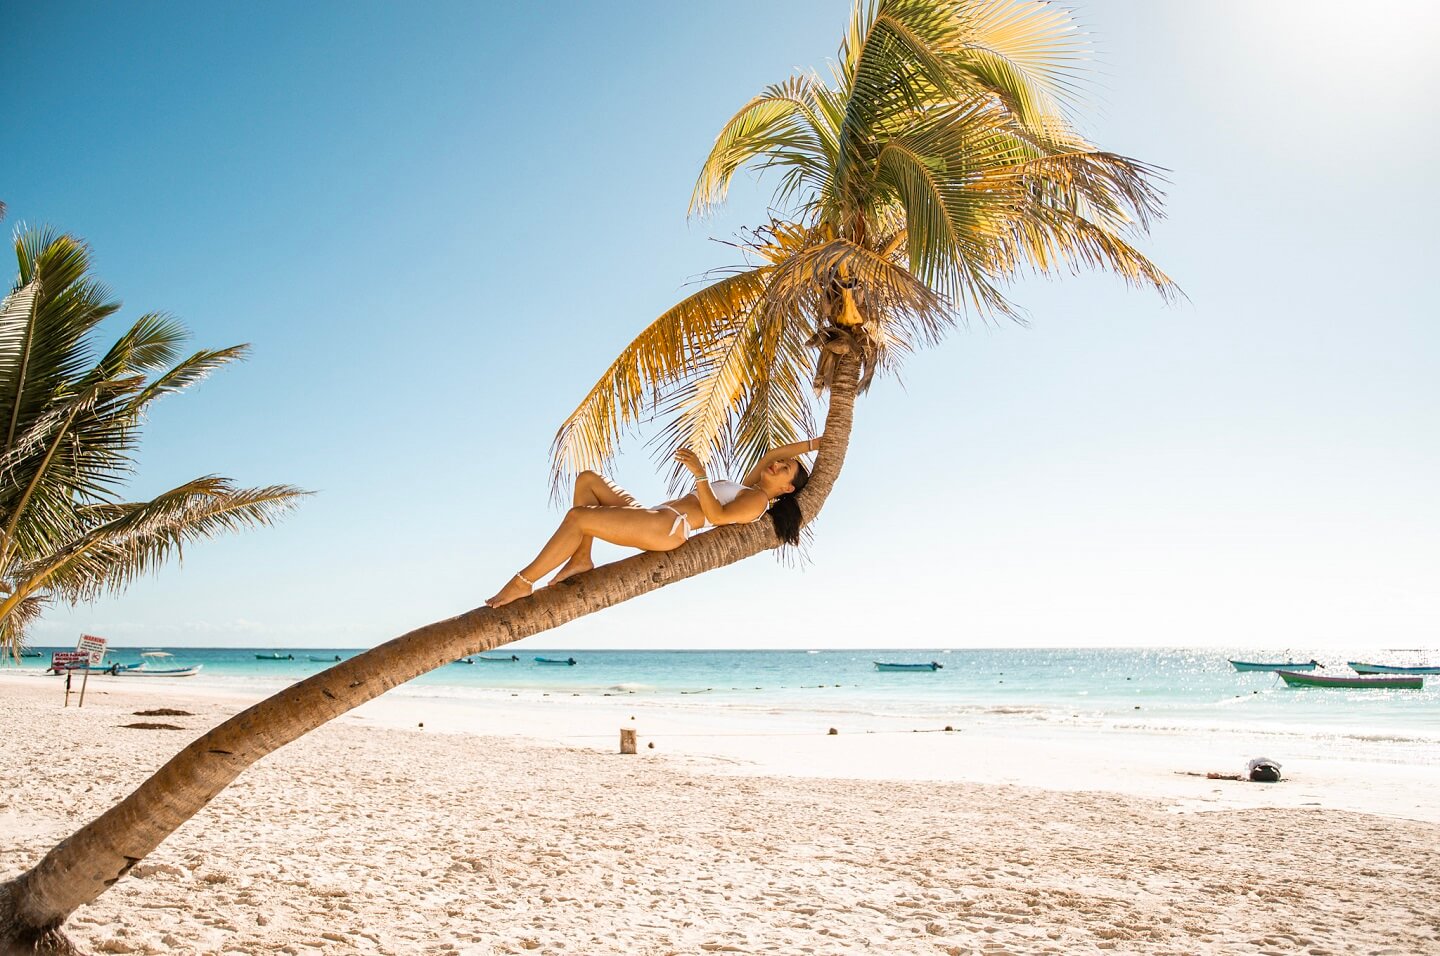 places to visit in tulum Crooked palm Tulum beach